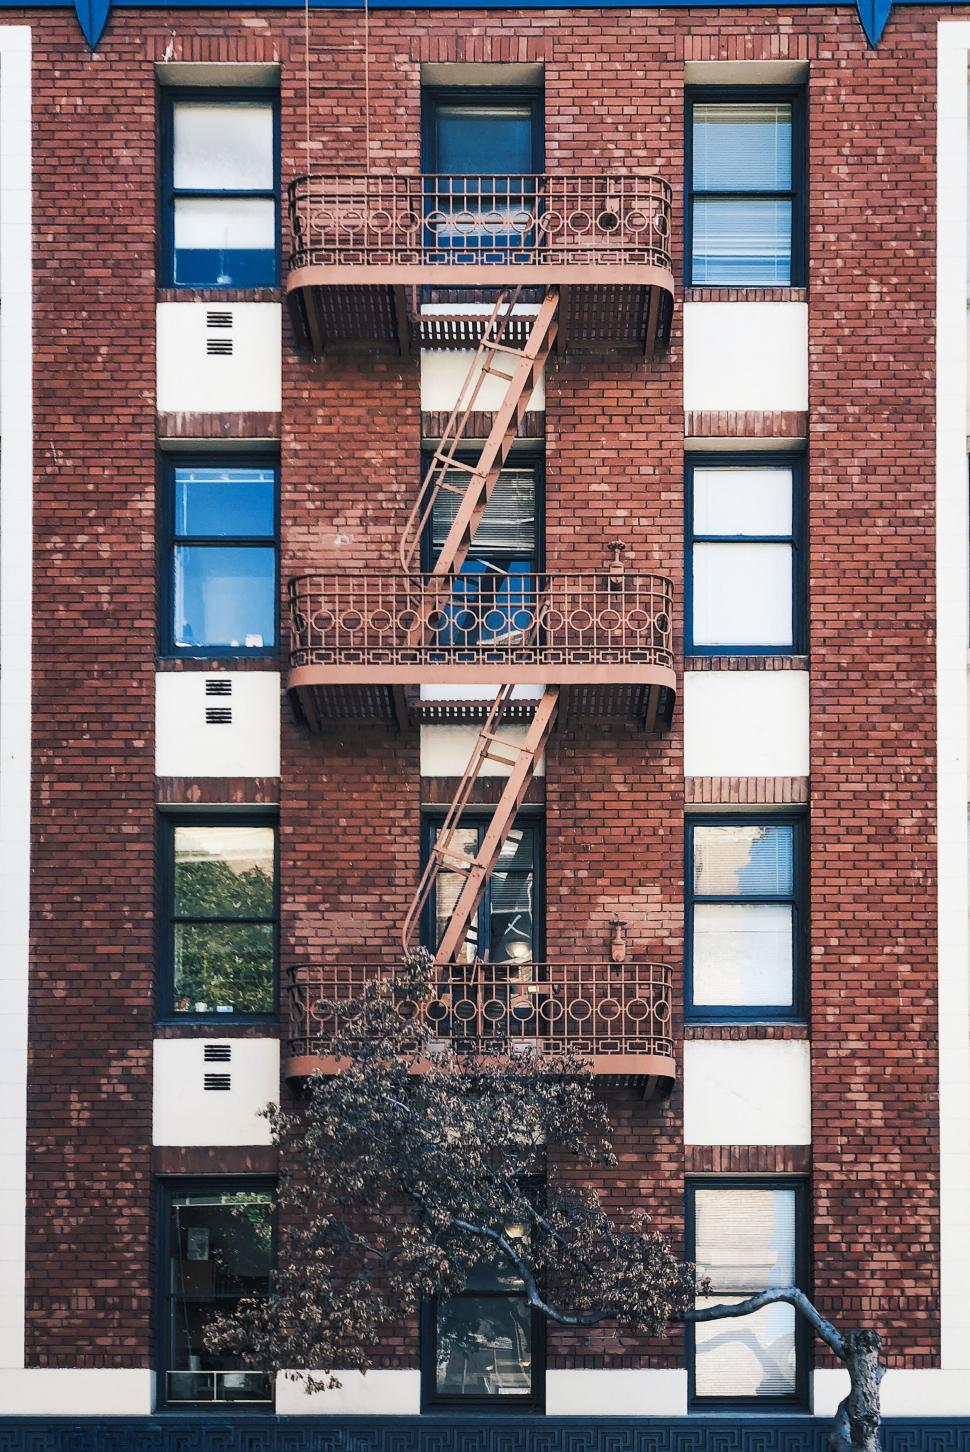 Free Image of Classic brick building with fire escapes 